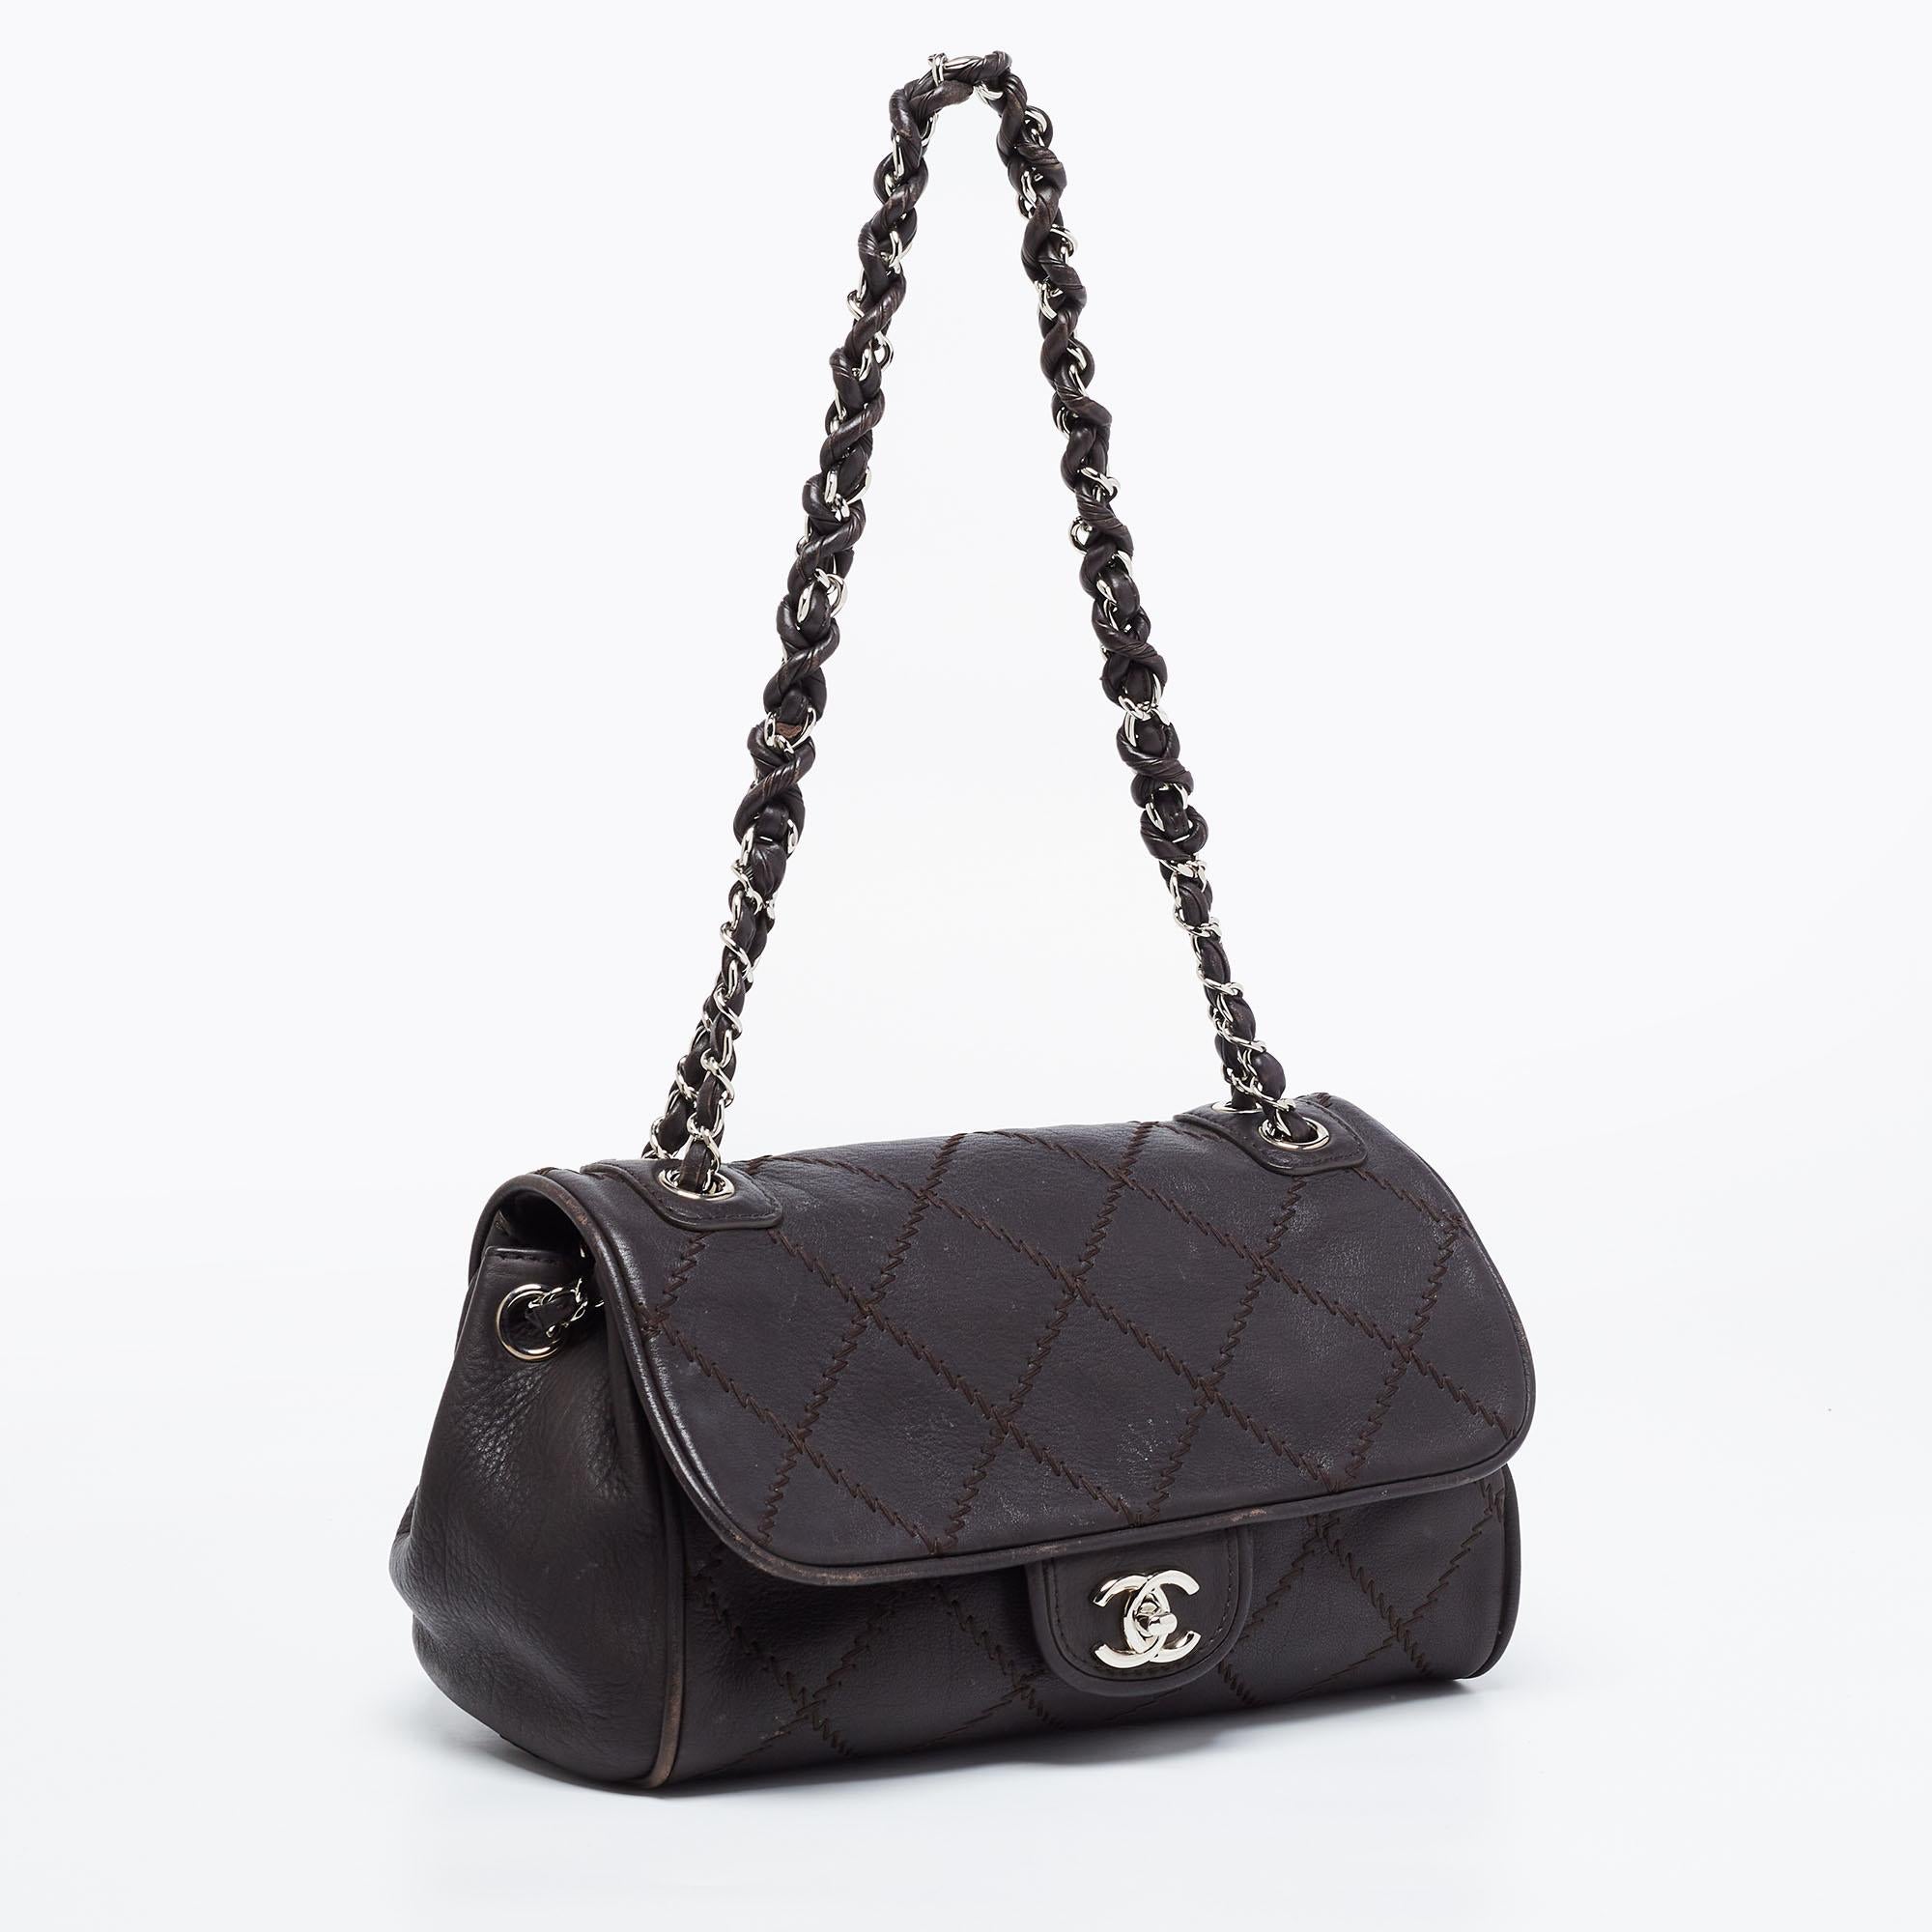 Women's Chanel Black Quilted Leather Ultimate Stitch Flap Bag